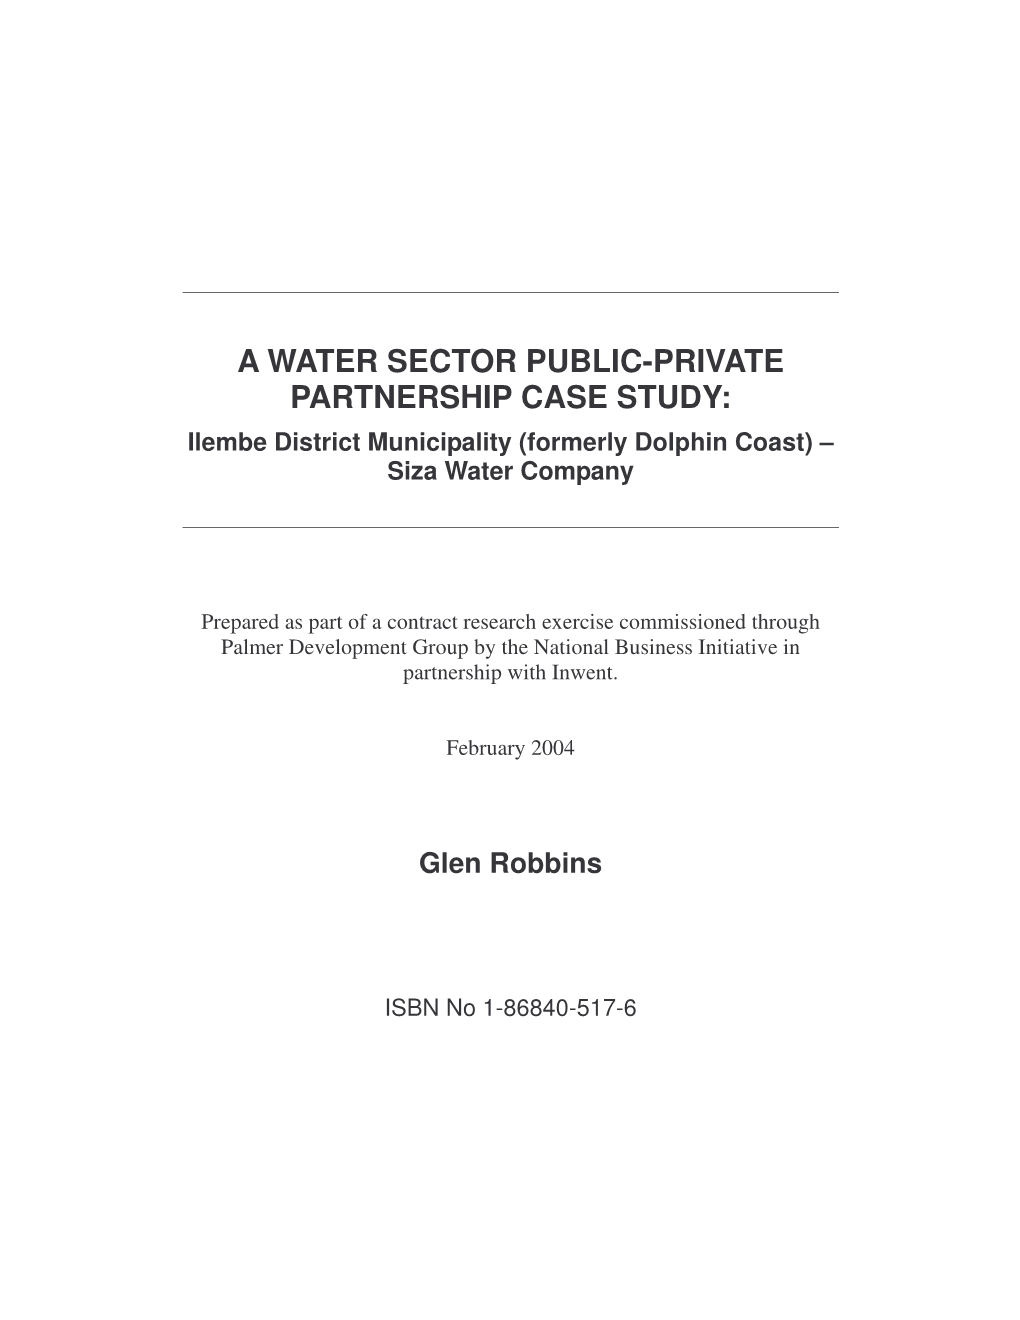 A Water Sector Public-Private Partnership Case Study Ilembe